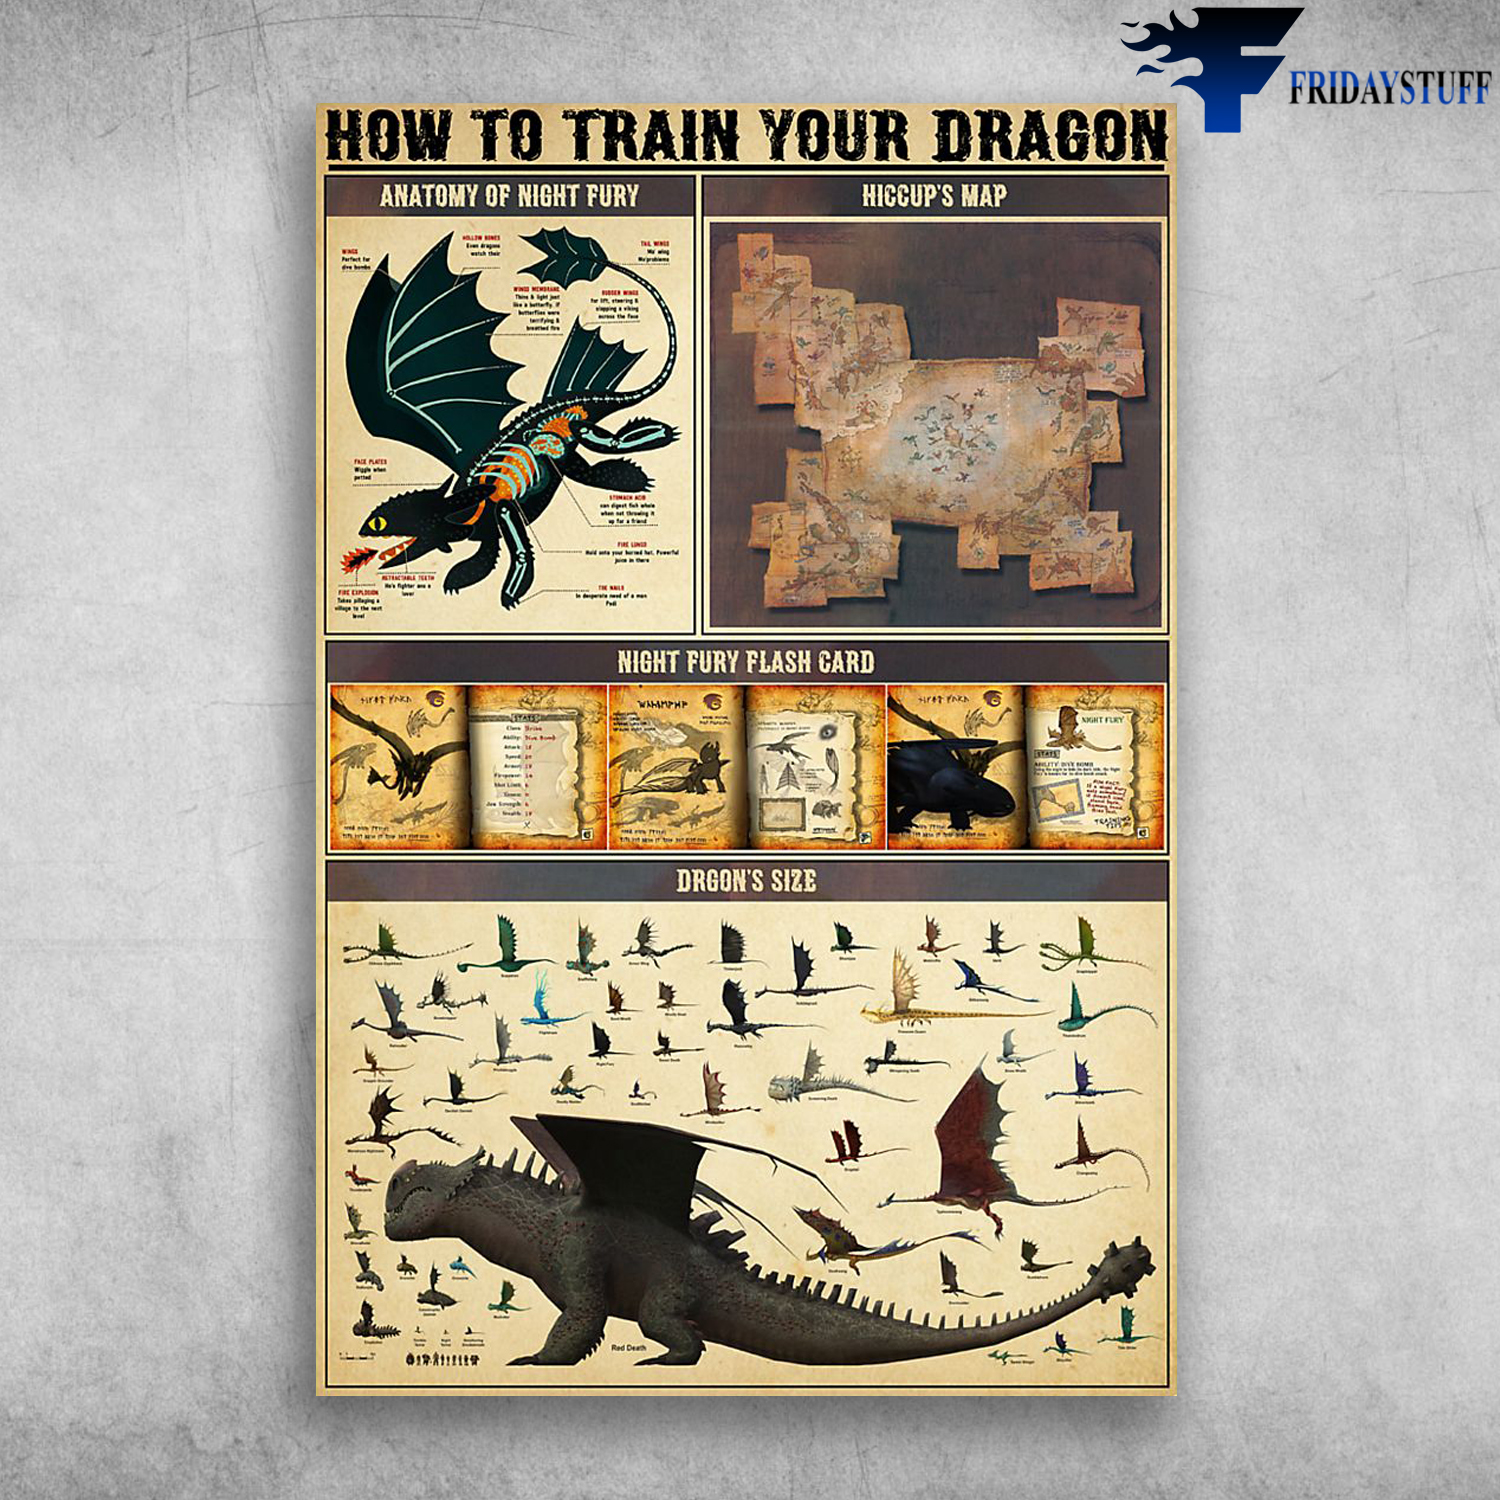 How To Train Your Dragon Anatomy Of Night Fury Hiccup's Map